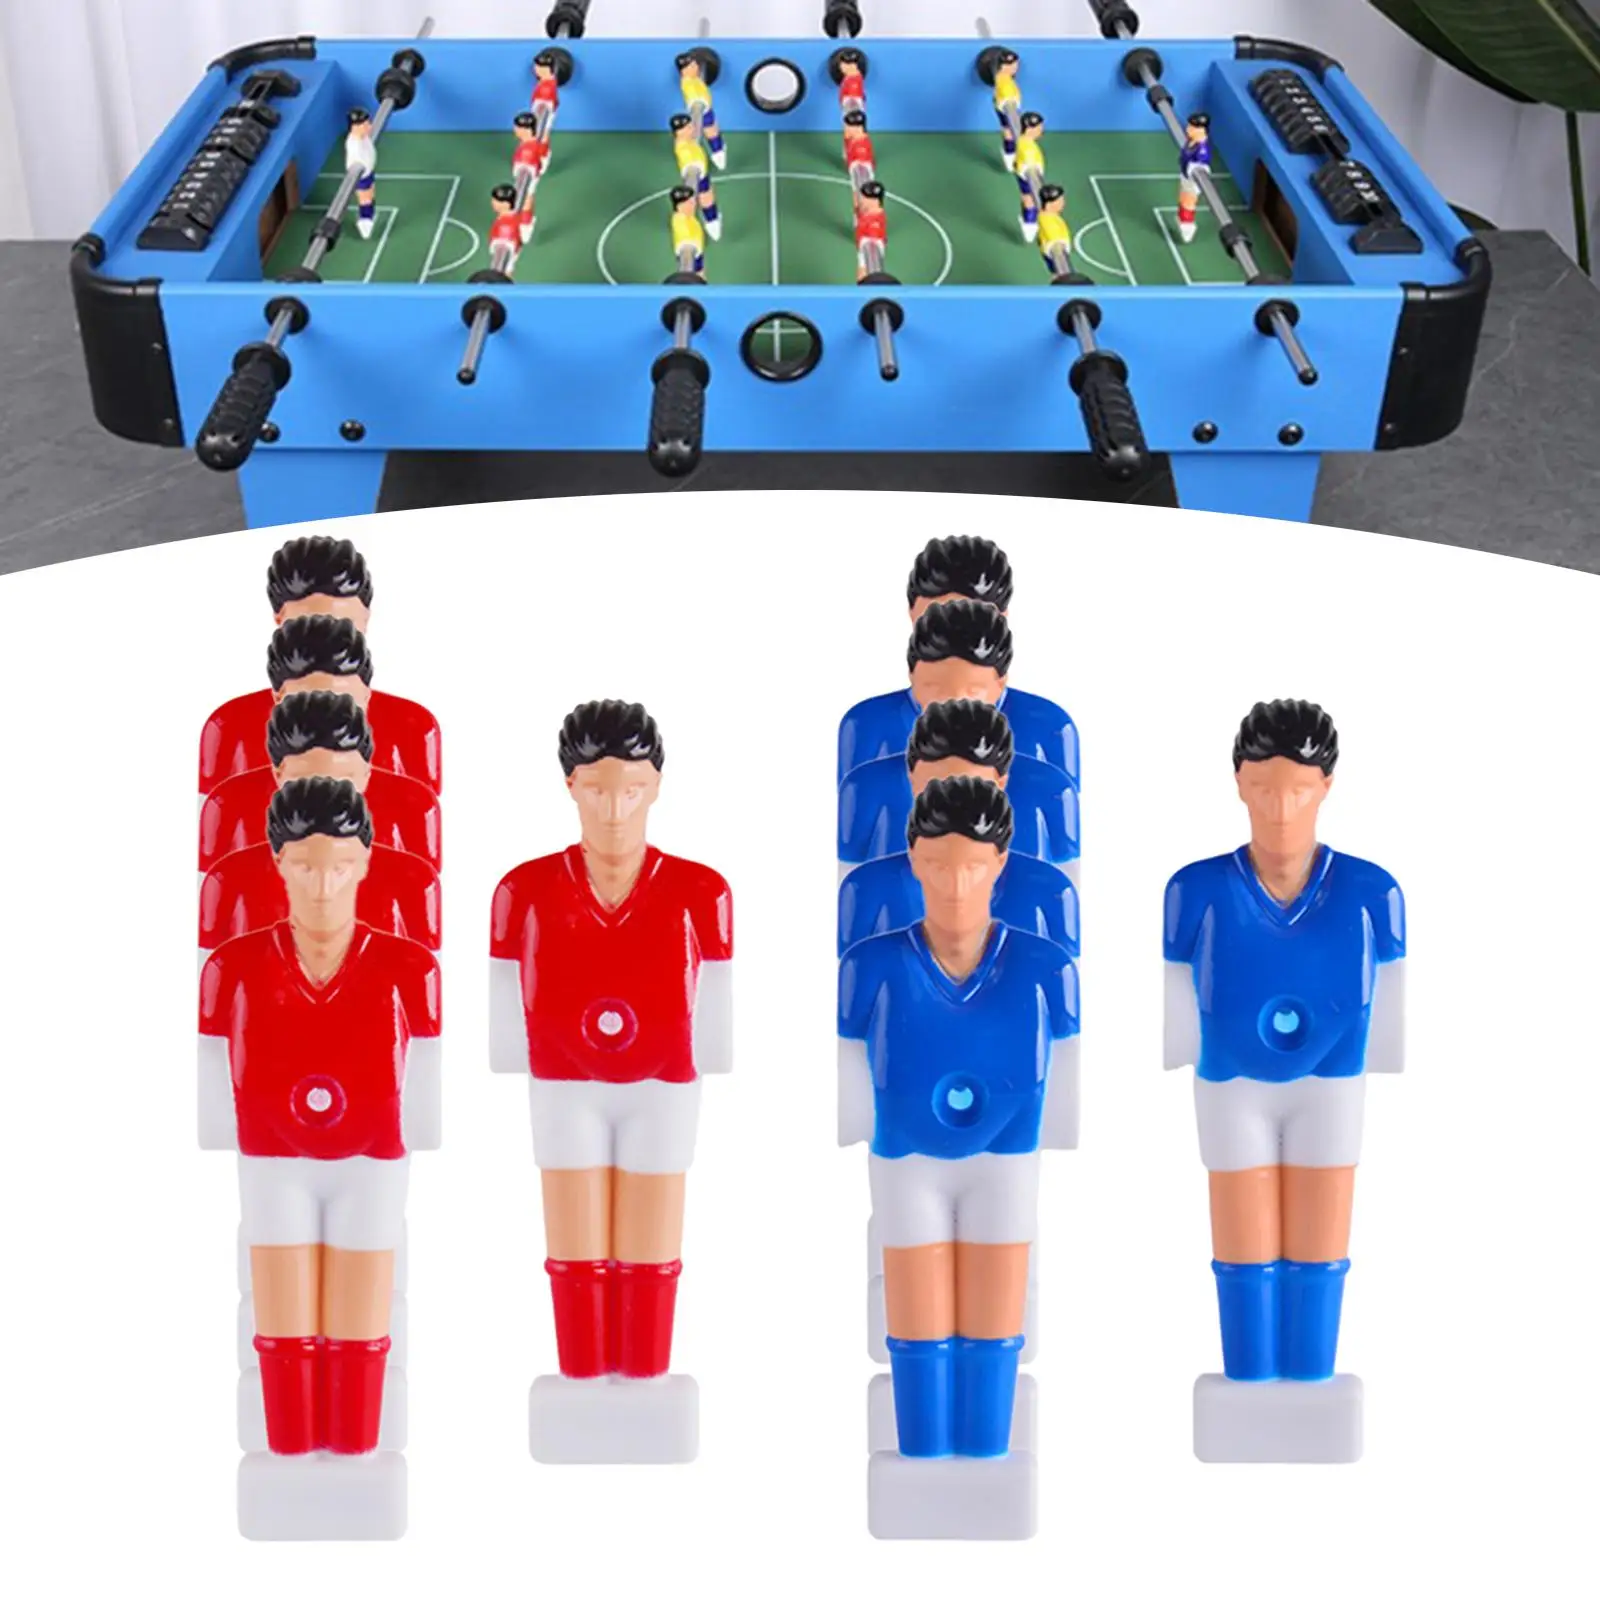 Set of 10 Foosball Player Humanoid 5 +5 Blue Replacement Soccer Games